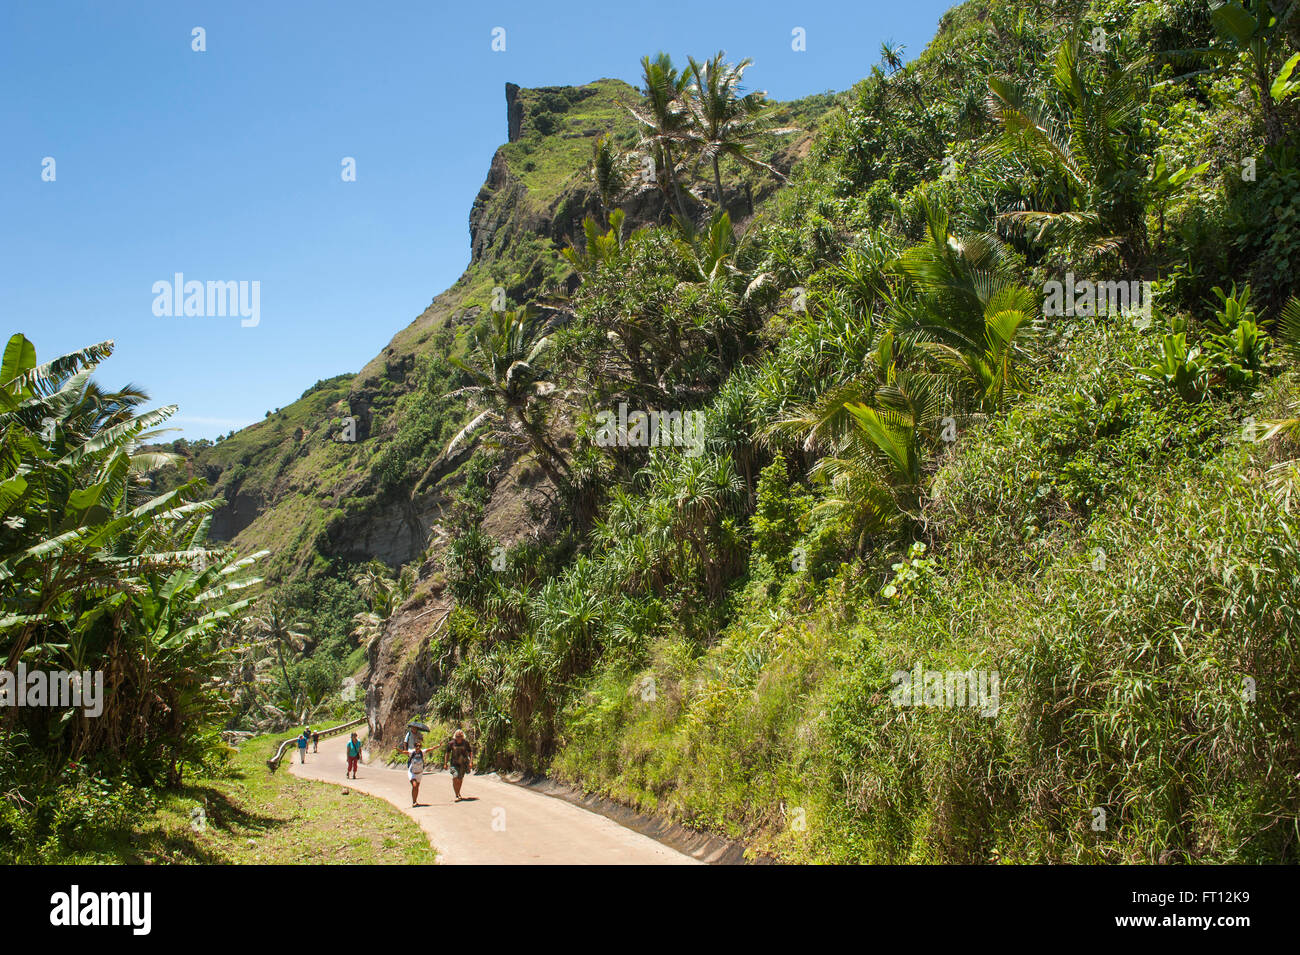 People walking on a pathway through a tropical forest, Pitcairn, Pitcairn Group of Islands, British Overseas Territory, South Pacific Stock Photo